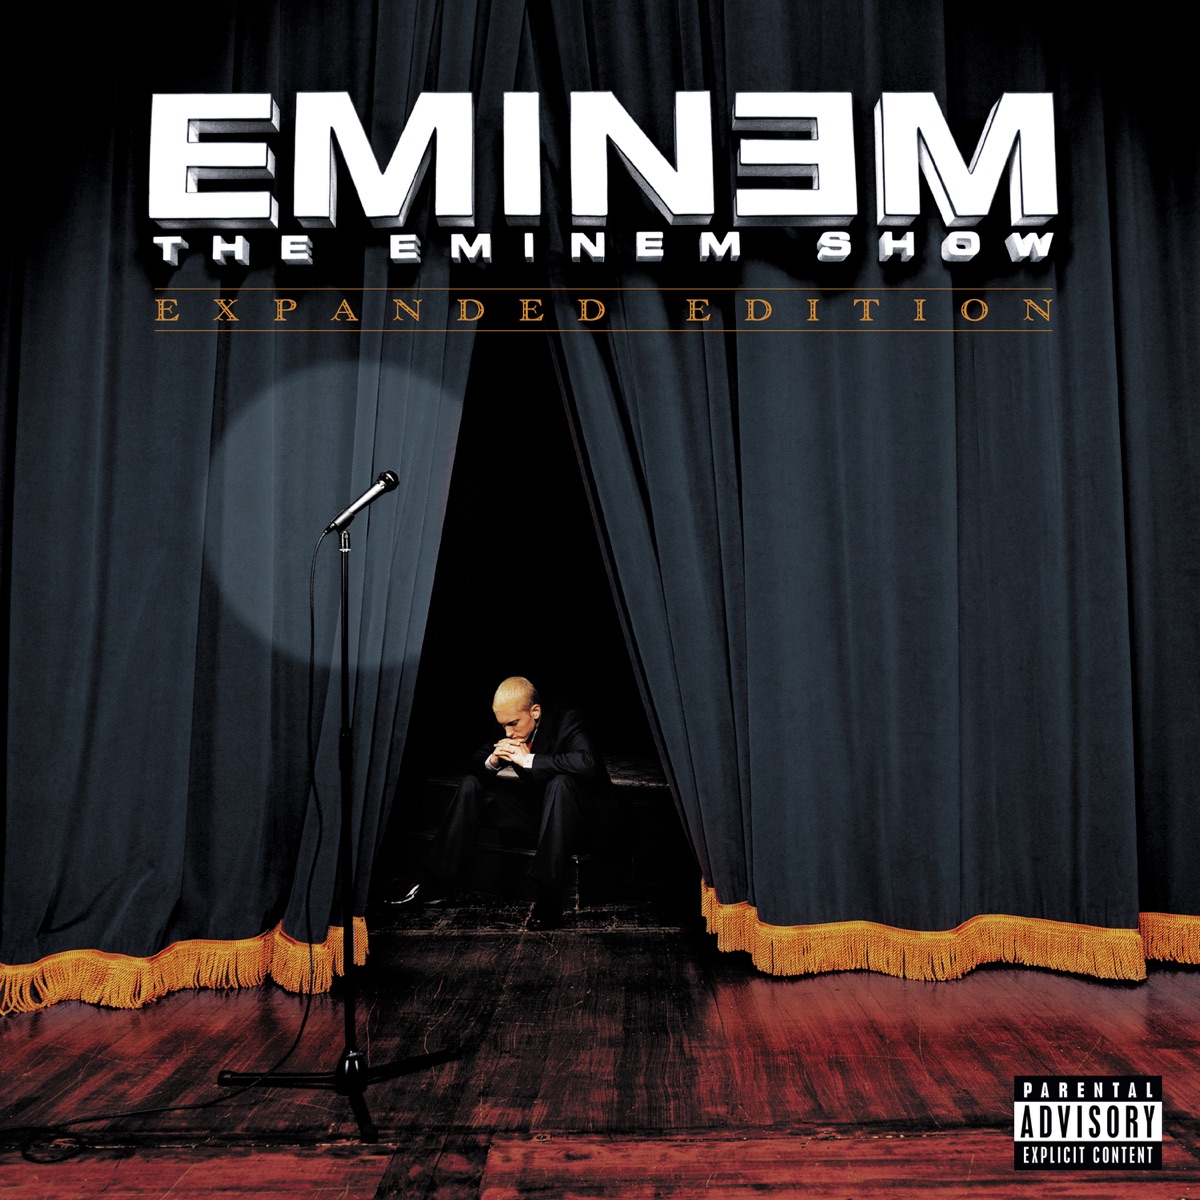 Curtain Call: The Hits (Deluxe Edition) by Eminem on Apple Music